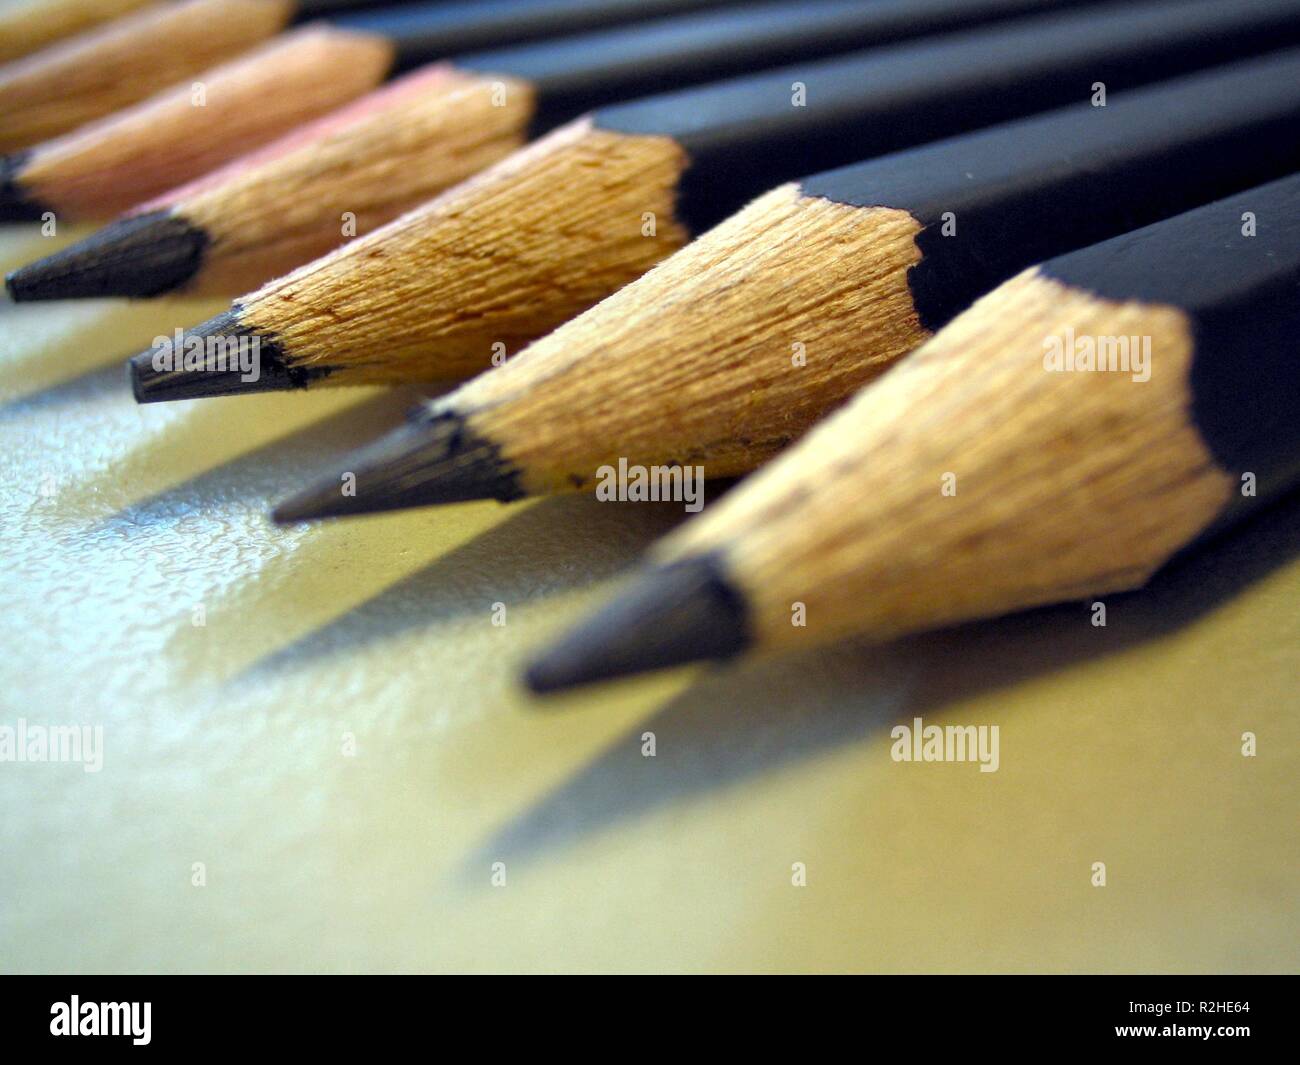 pencils in an inclined position Stock Photo